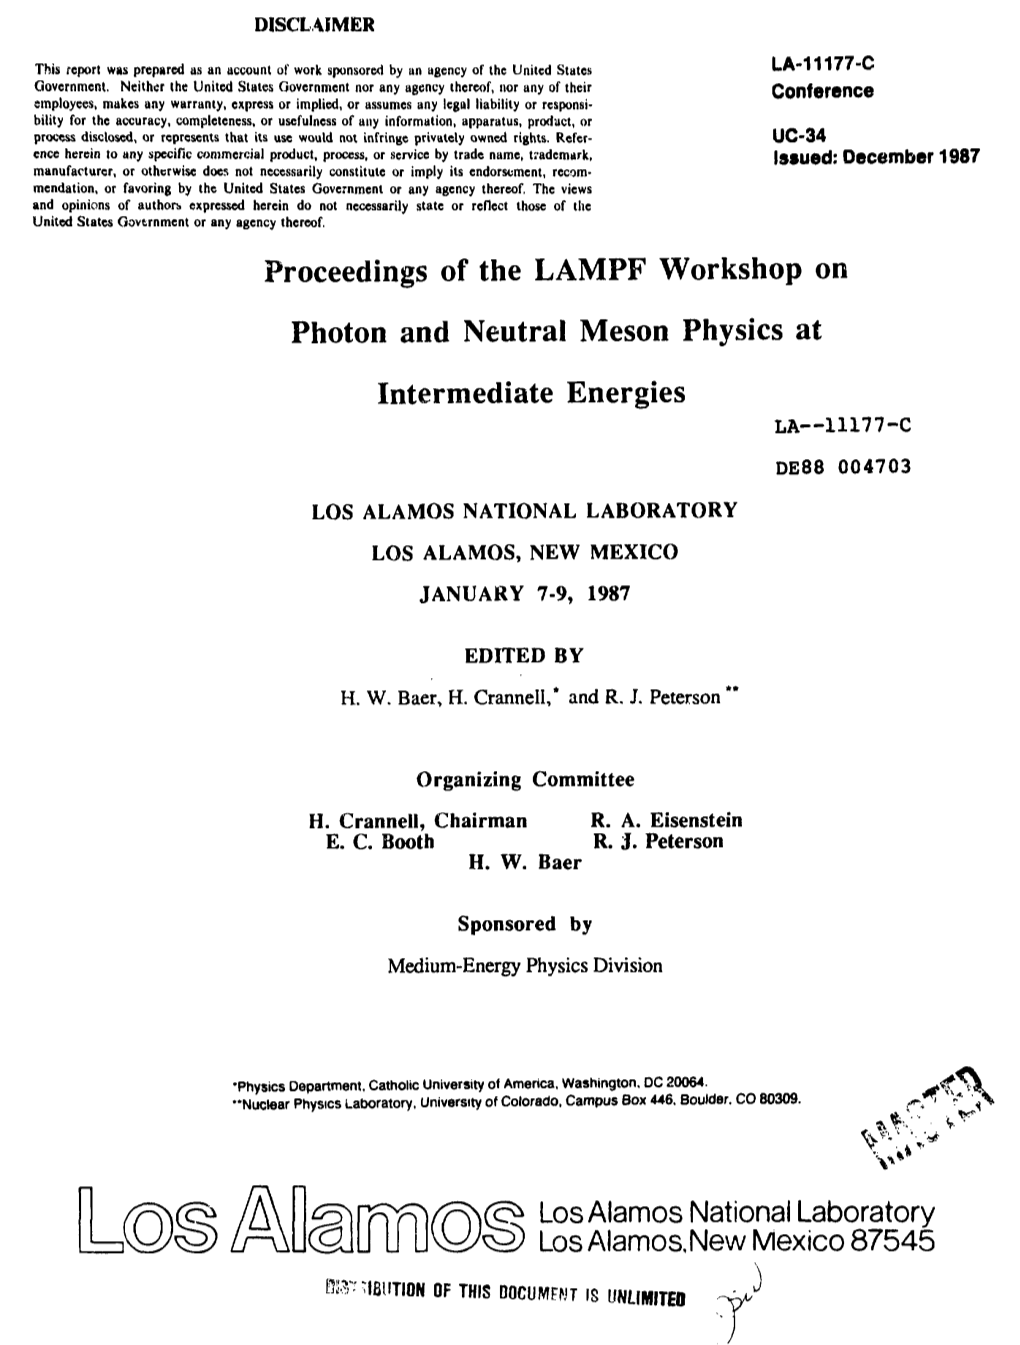 Proceedings of the LAMPF Workshop on Photon and Neutral Meson Physics at Intermediate Energies LA—11177-C DE88 004703